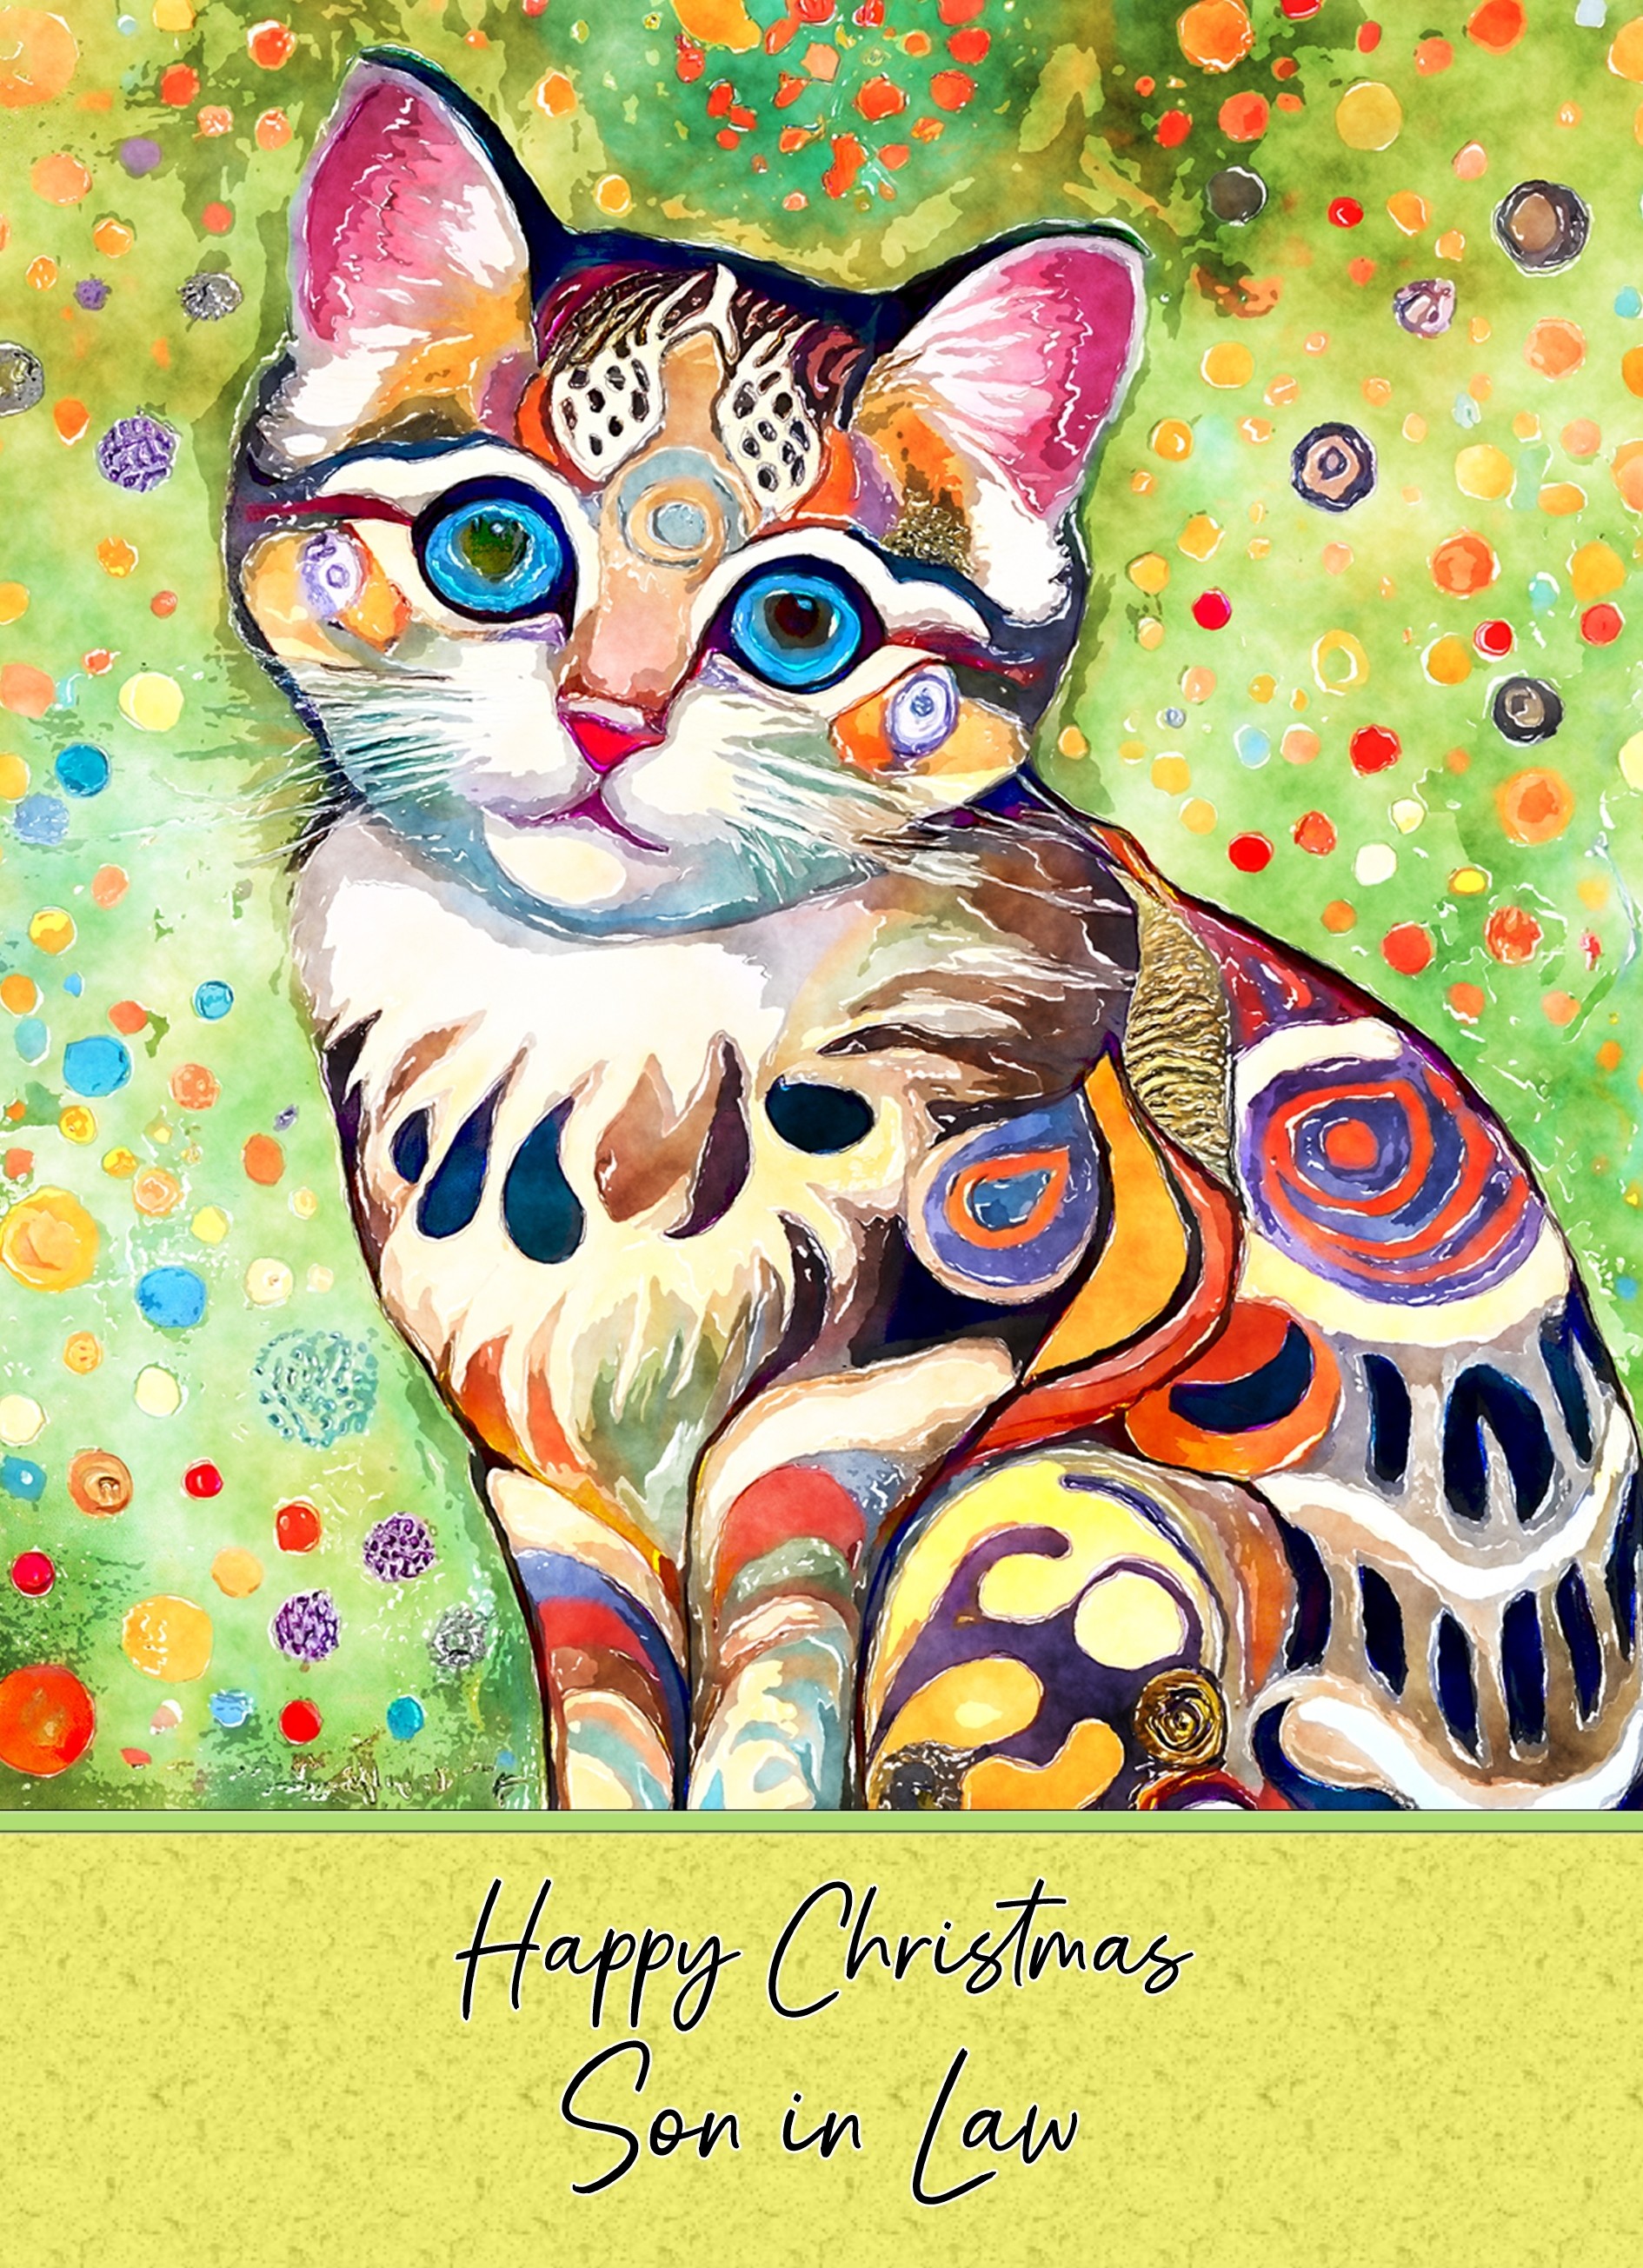 Christmas Card For Son in Law (Cat Art Painting)